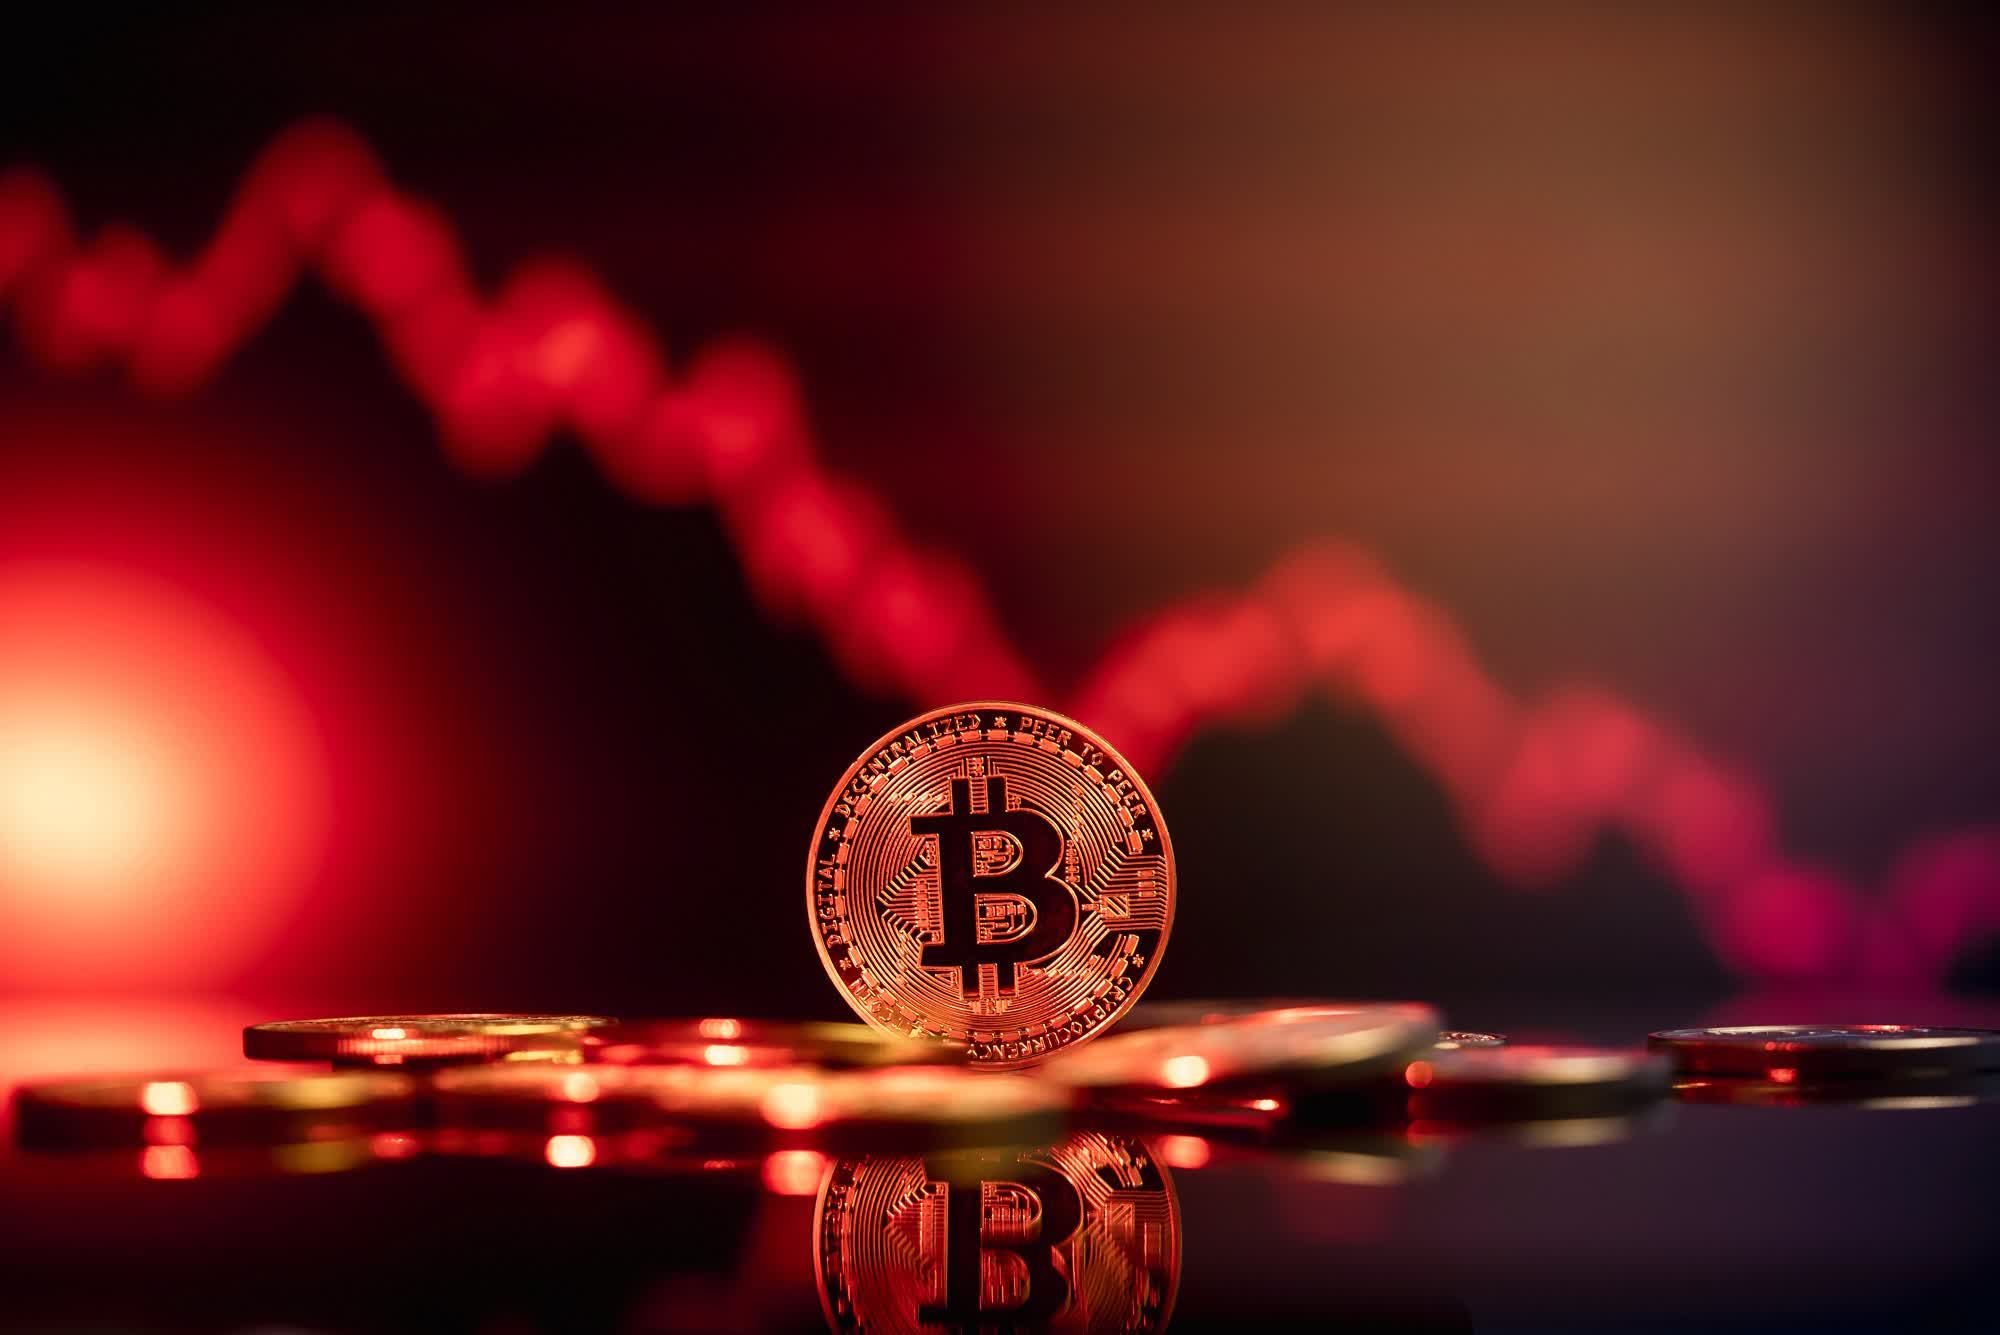 Crypto crash: almost $1 trillion wiped off markets as Bitcoin hits lowest level since 2020